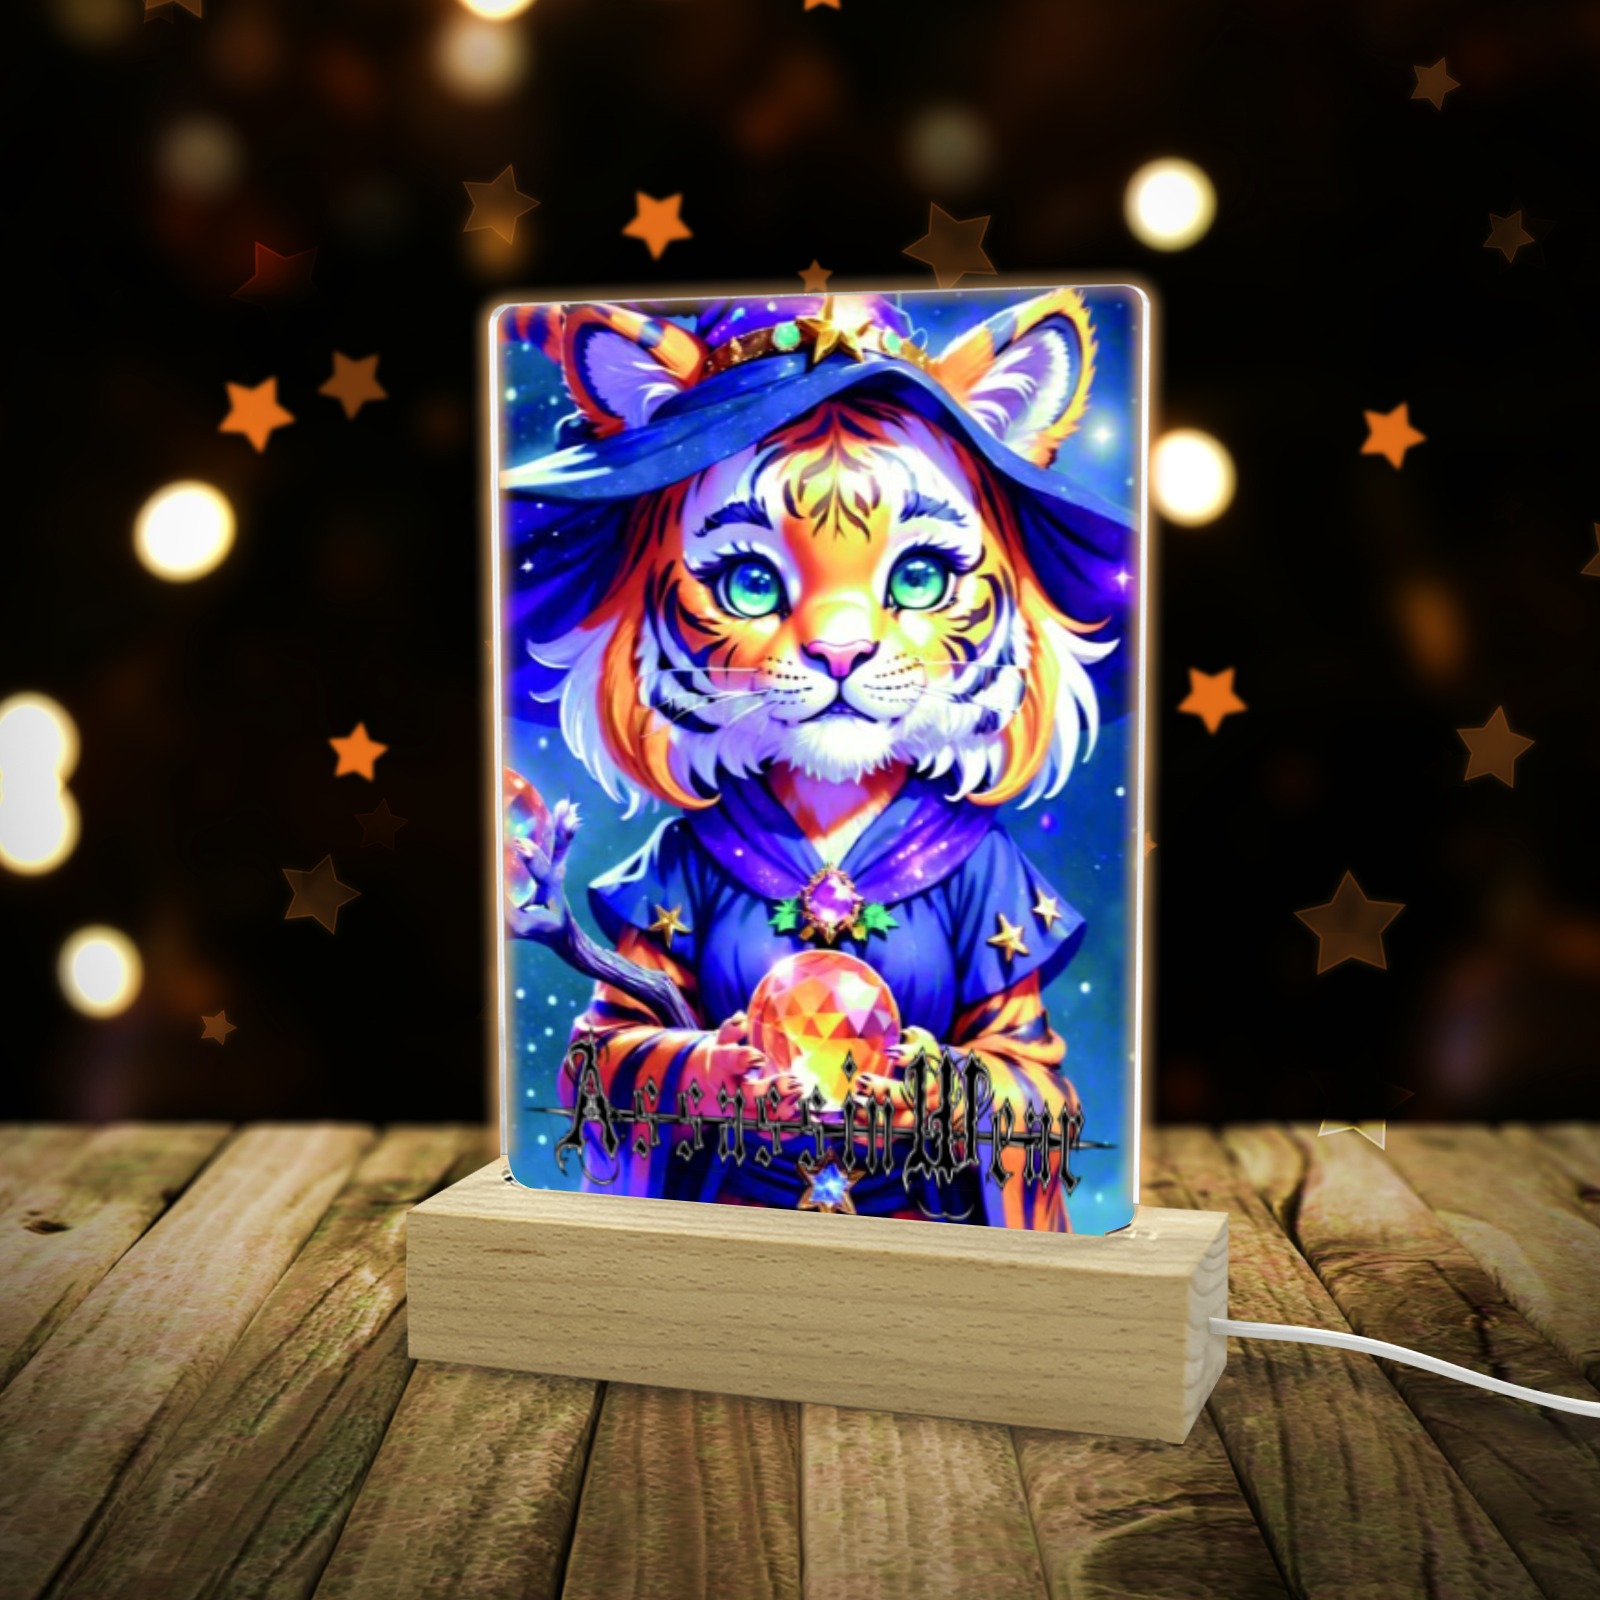 Tiger Cub Wiccan Acrylic Photo Print with Colorful Light Square Base 5"x7.5"